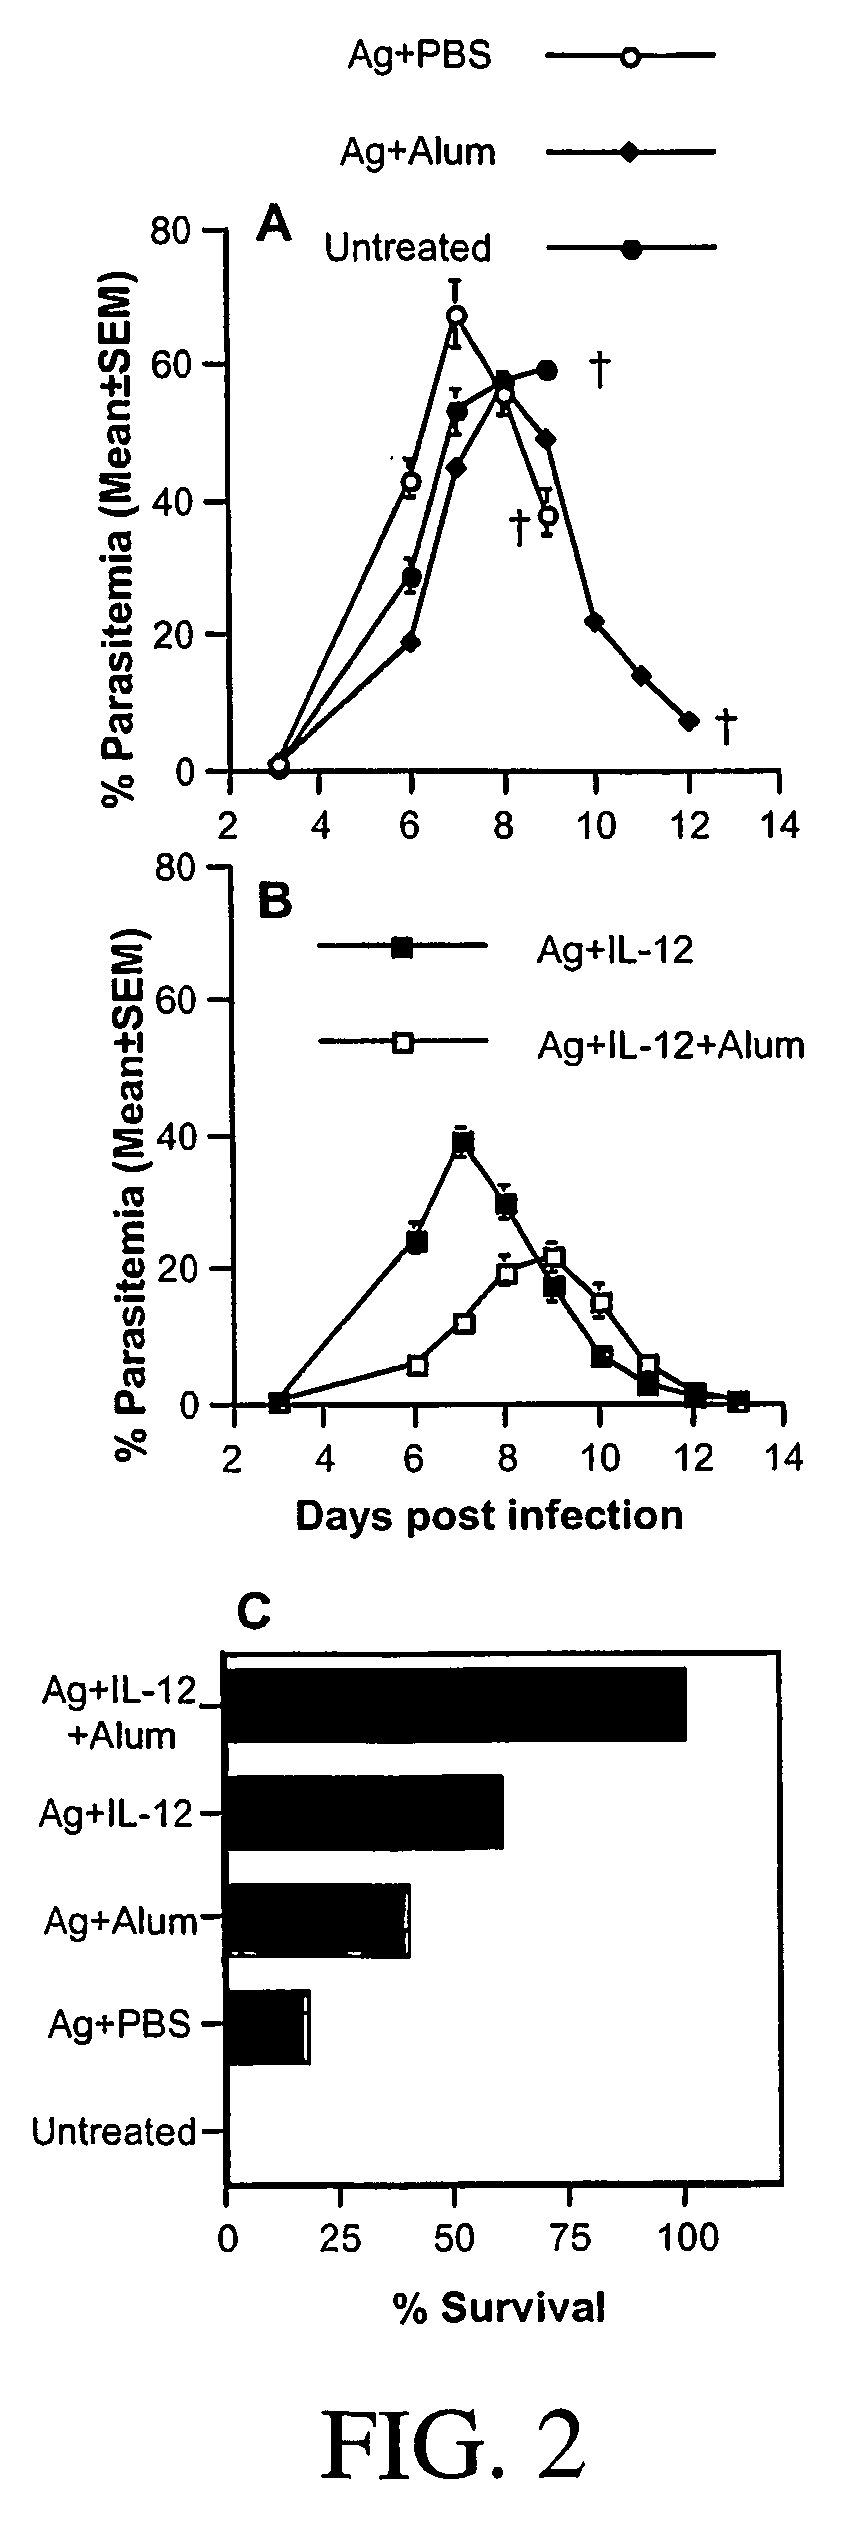 Immunogenic agent and pharmaceutical composition for use against homologous and heterologous pathogens